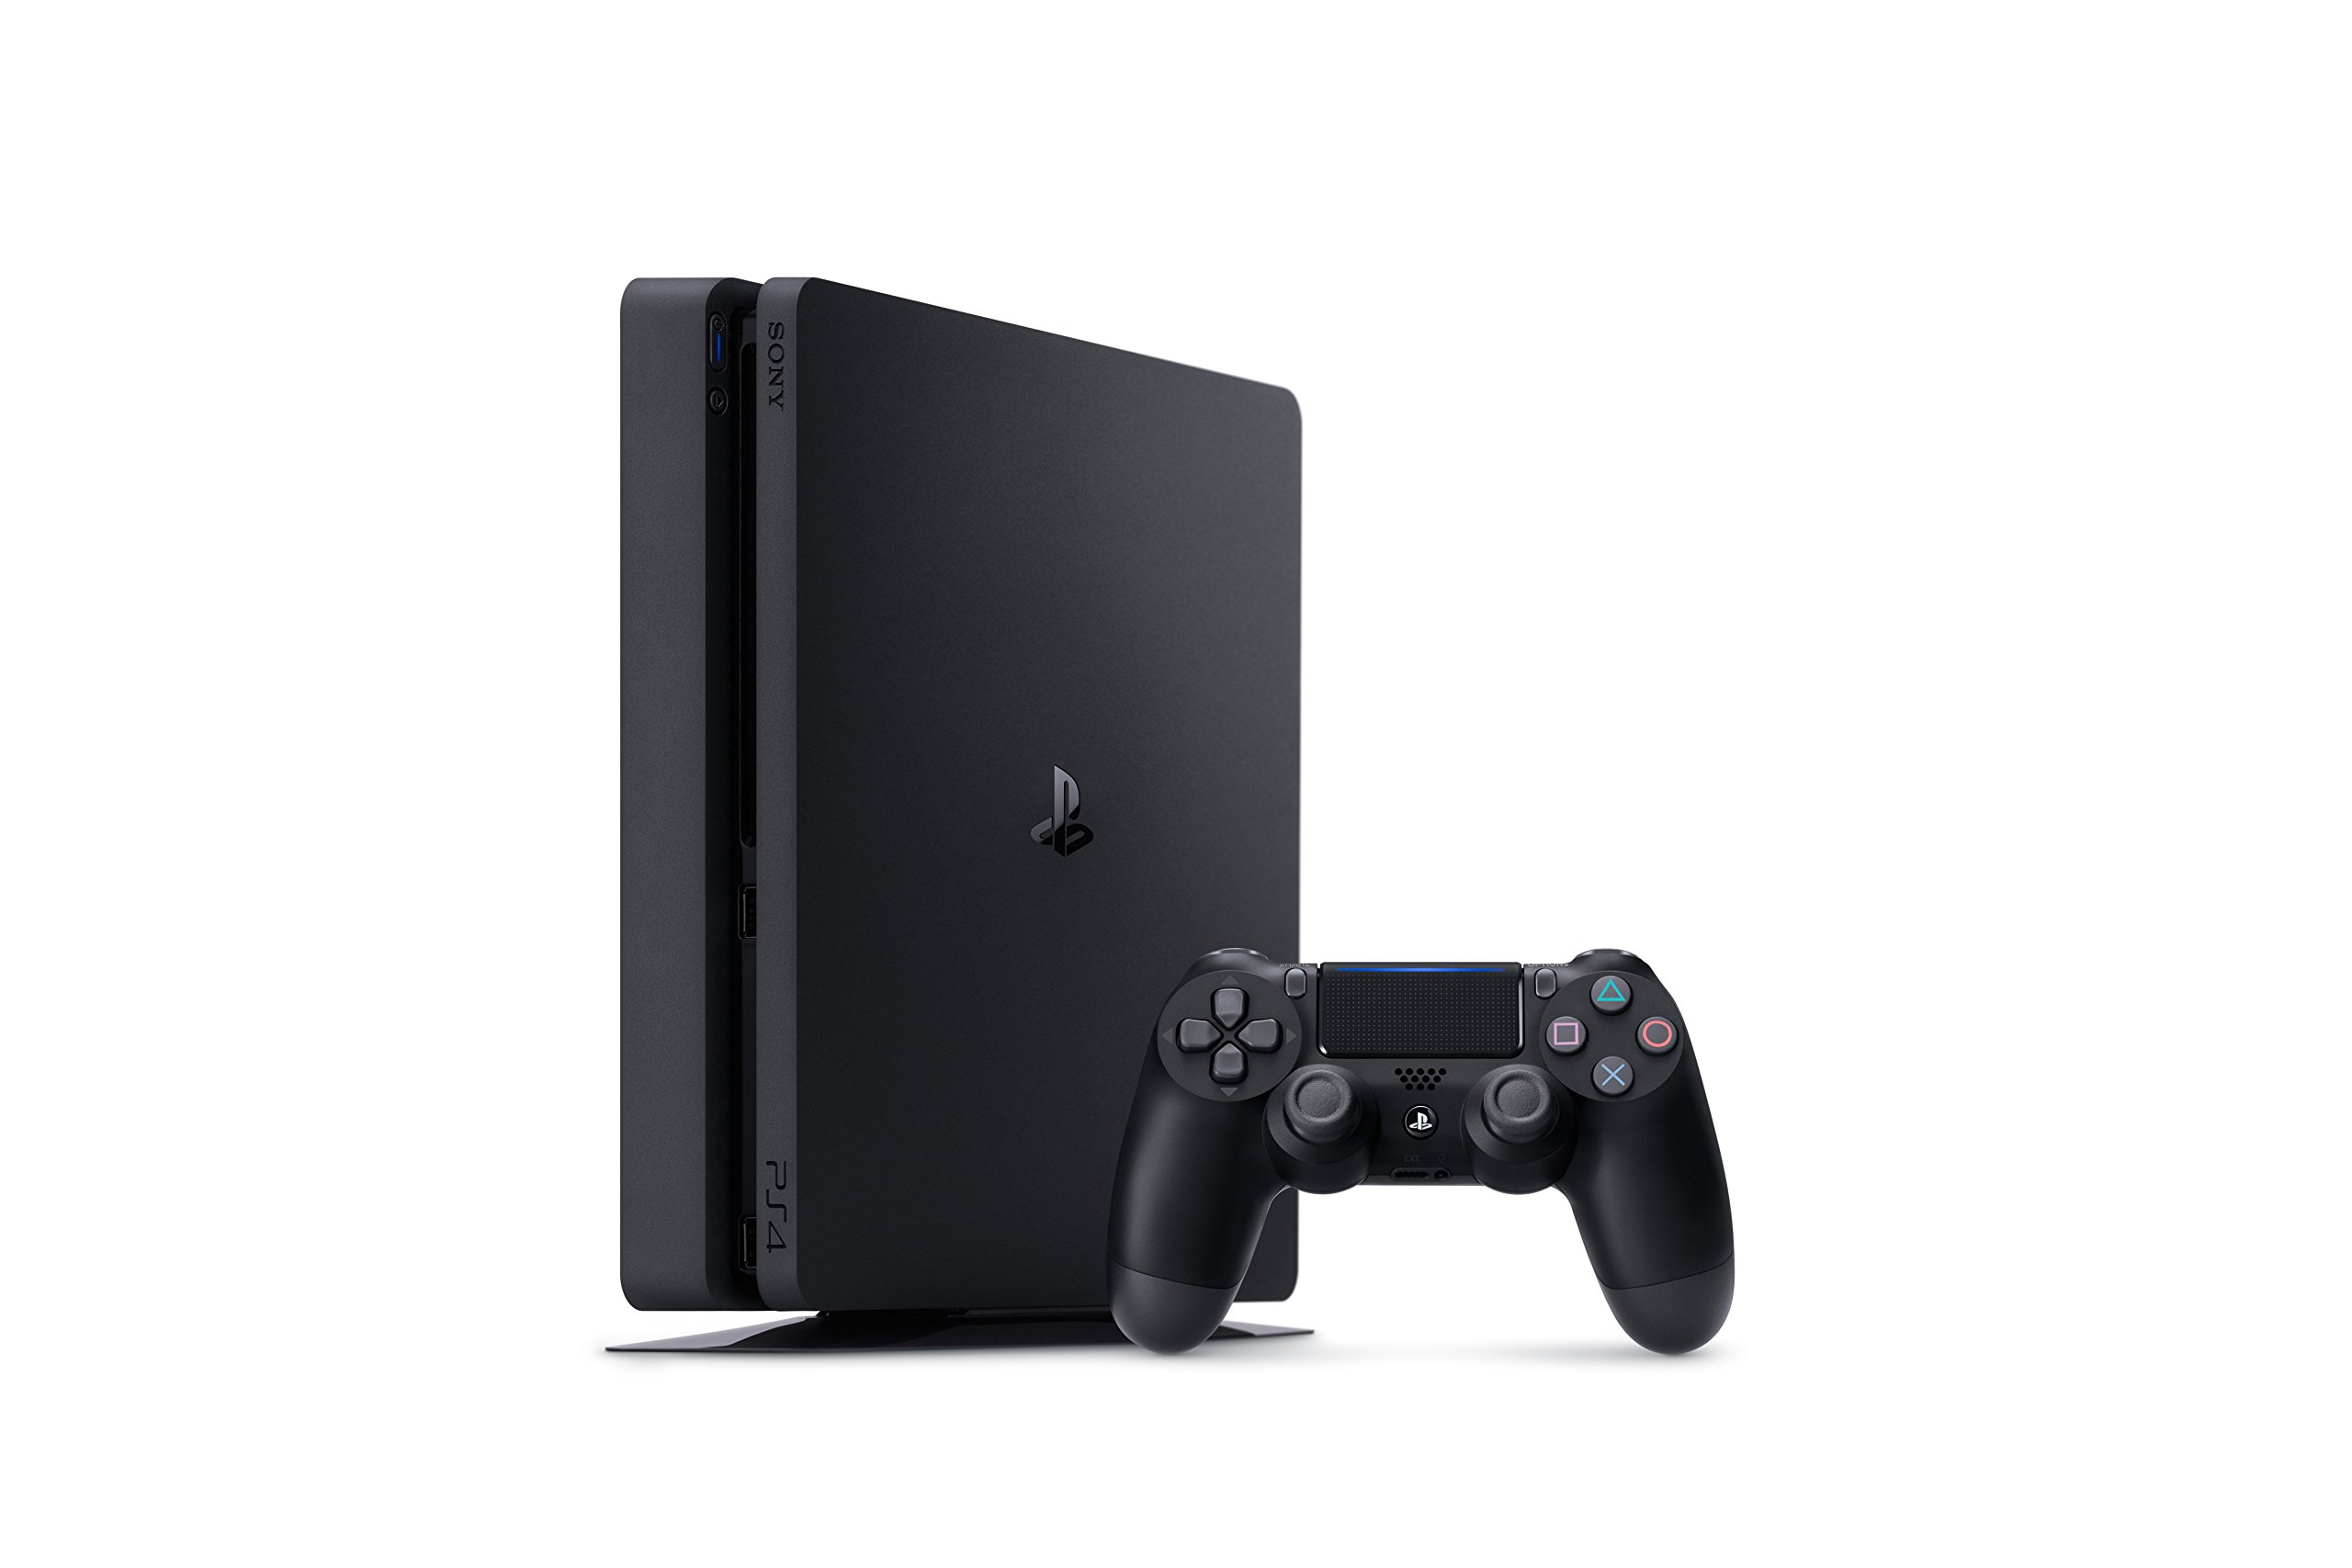 playstation 4 slim 1tb console - image 3 of 7